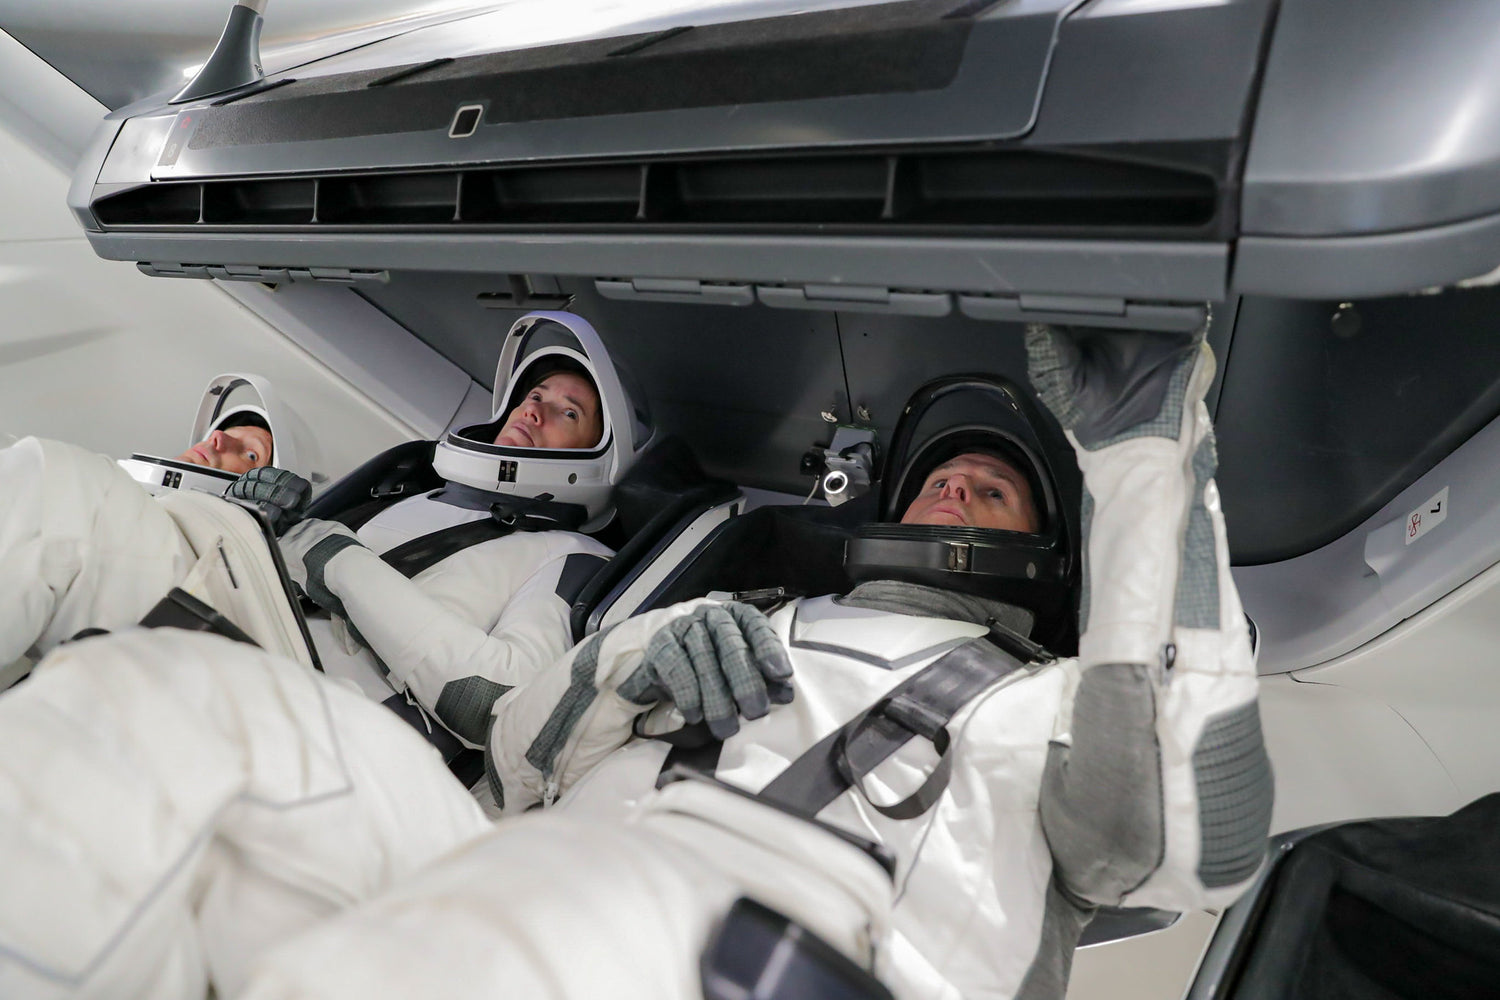 Meet The Astronauts Who Will Launch Aboard SpaceX’s Crew Dragon Next Month